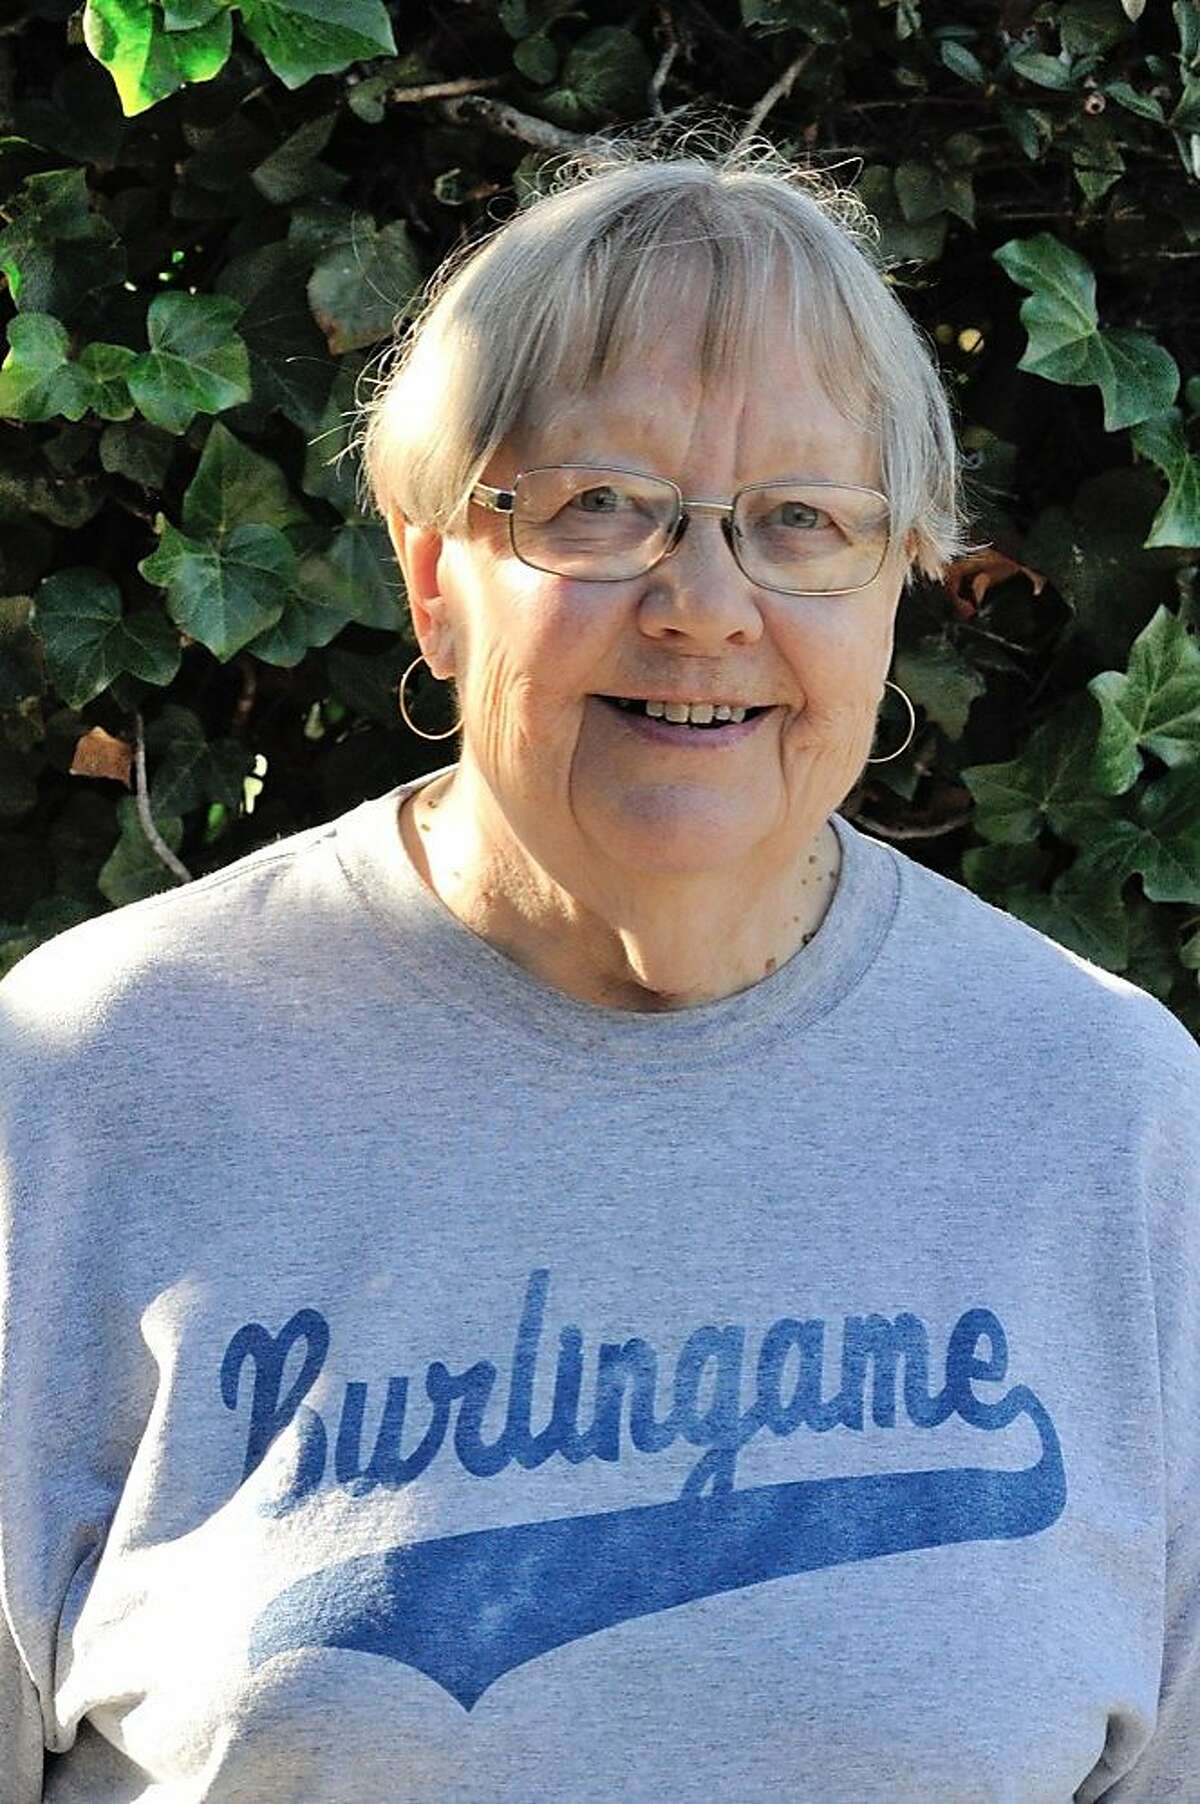 Georgia Rothrock, 85, has lived with Marie Hatch for 32 years in Burlingame as a subletting roommate.